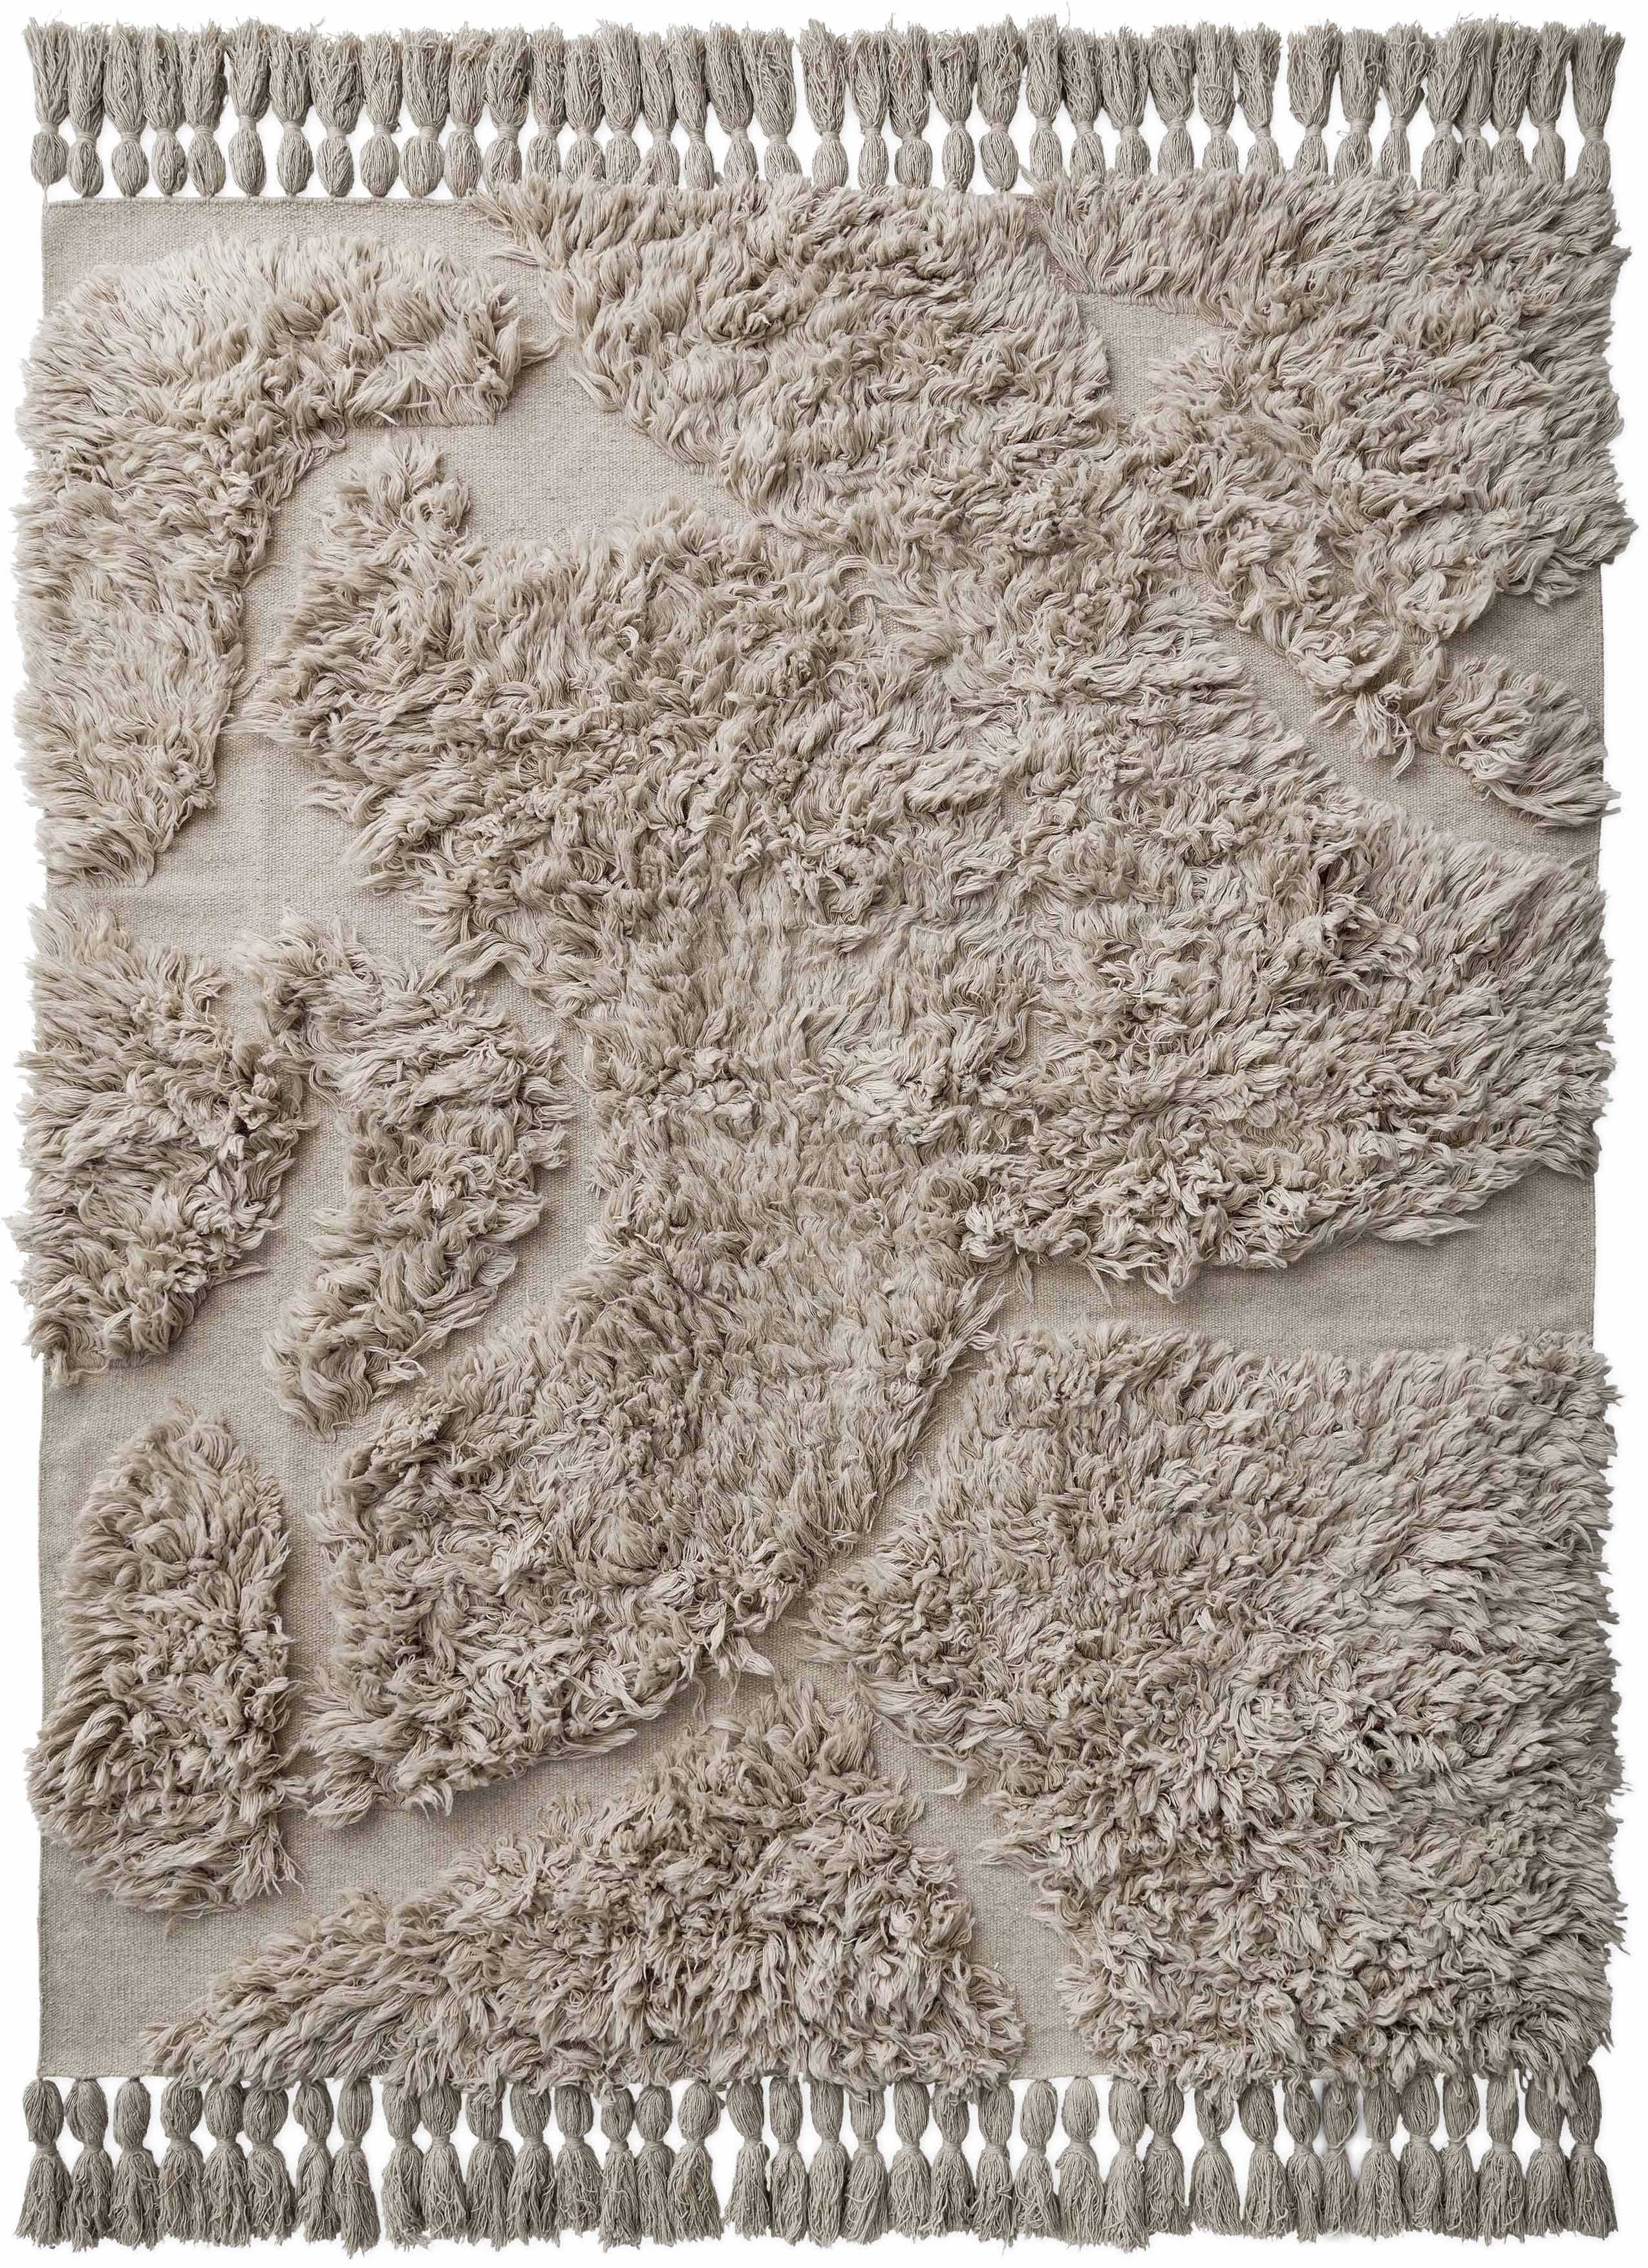 No.07 Rug by Cappelen Dimyr
Dimensions: D290 x H350 cm
Materials: 85% wool 15% cotton

no.07 is an homage to the understated bohemian elegance that is the core DNA of Cappelen Dimyr. The soft irregular pattern of high and lows creates a vivid